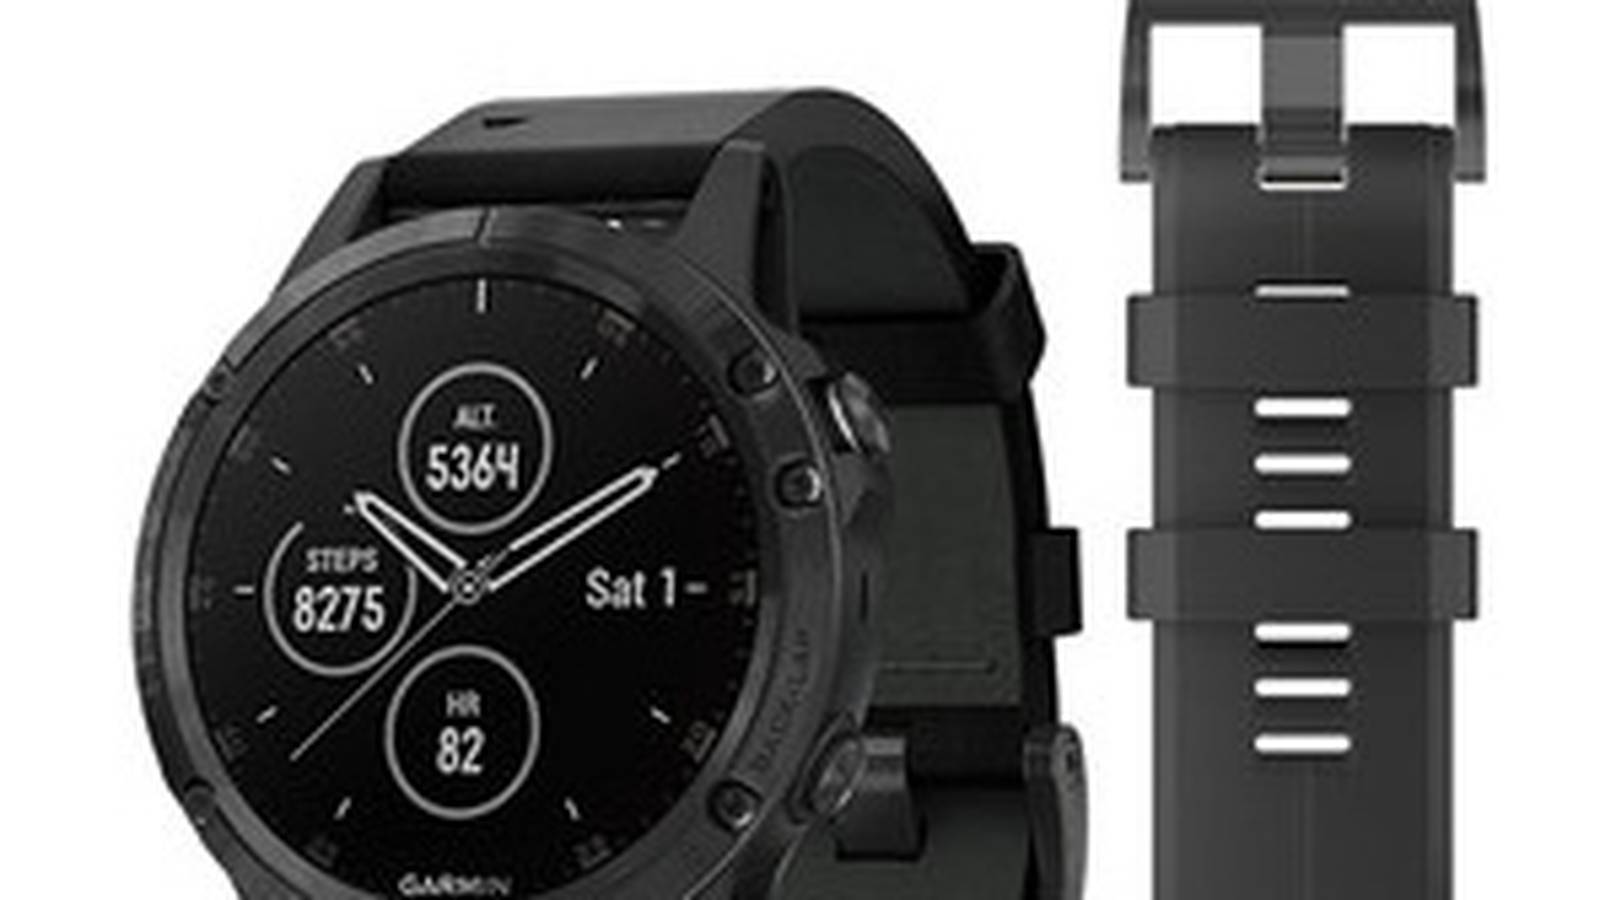 The Garmin Fenix 5 Plus will get you to Hell and back – The Irish